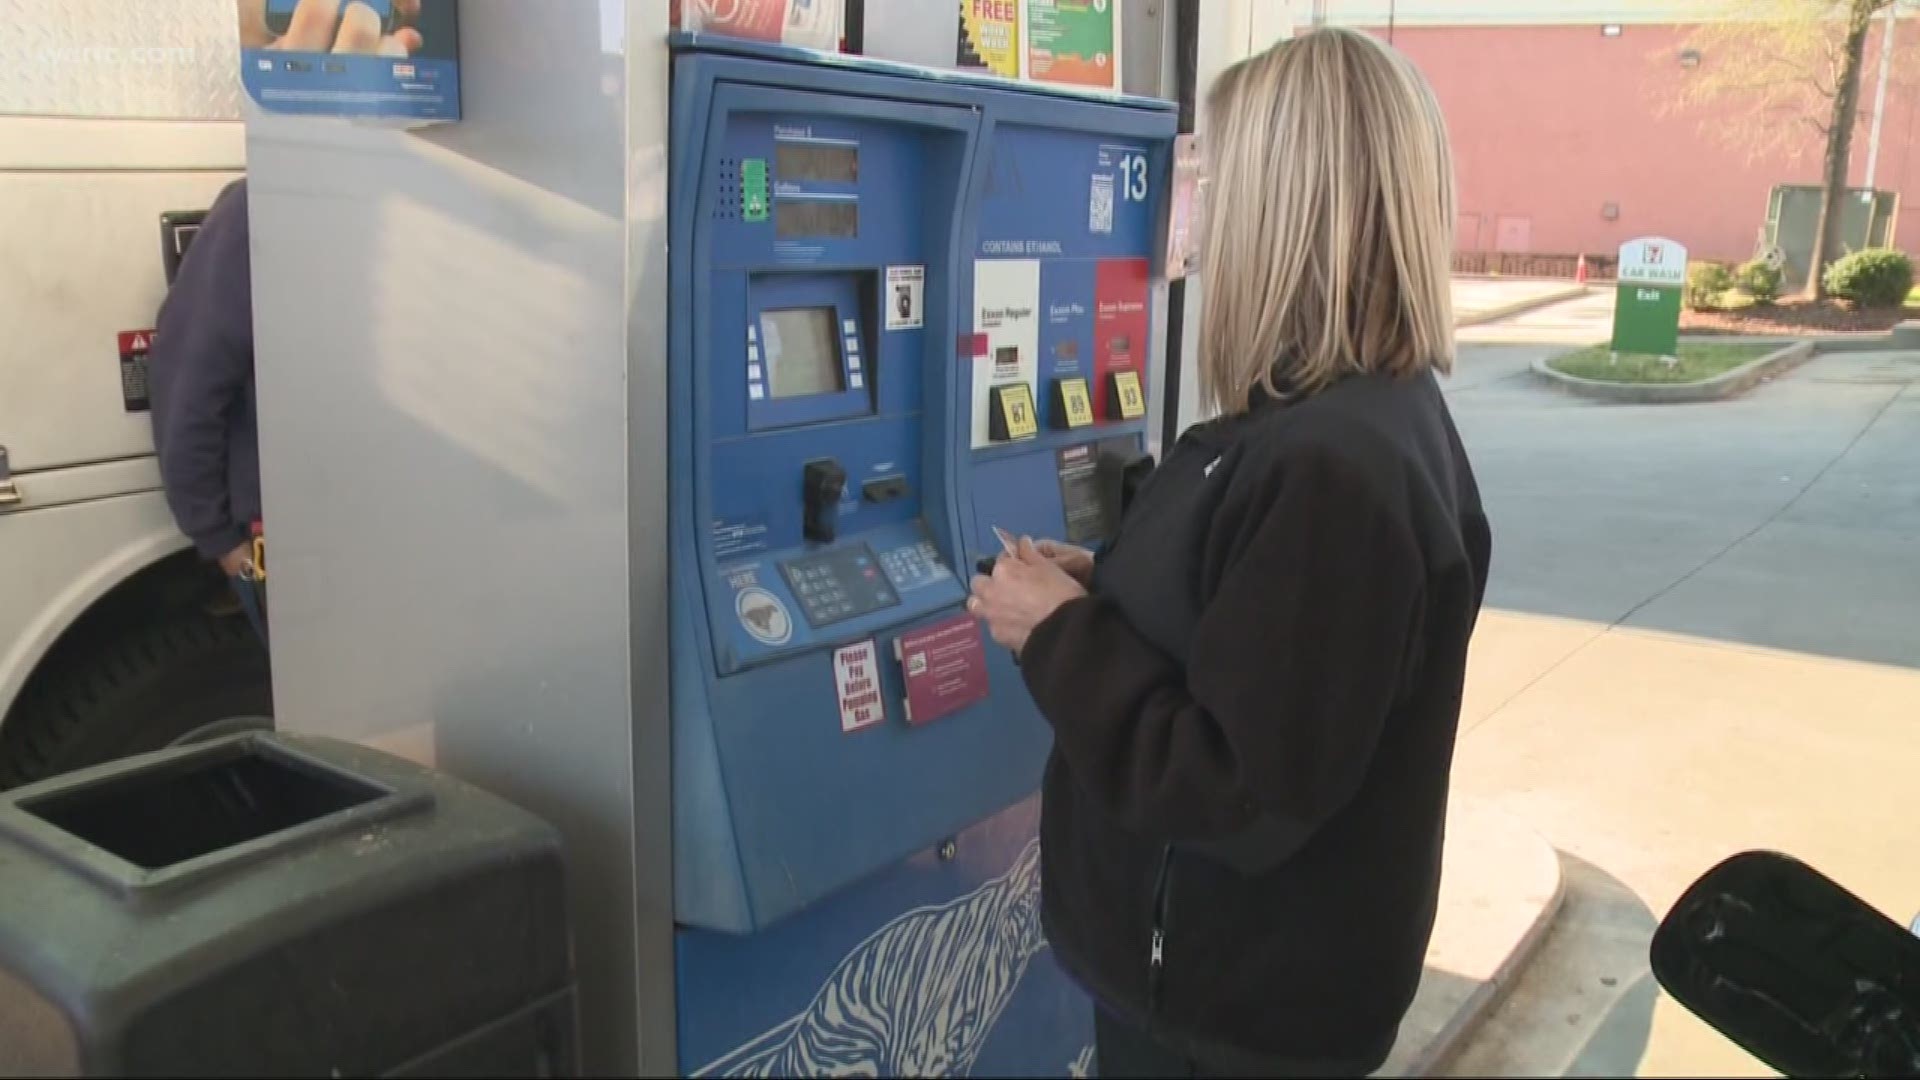 Drivers in the Charlotte area got some relief when the Mobil gas station in Concord gave away free gas cards Thursday.